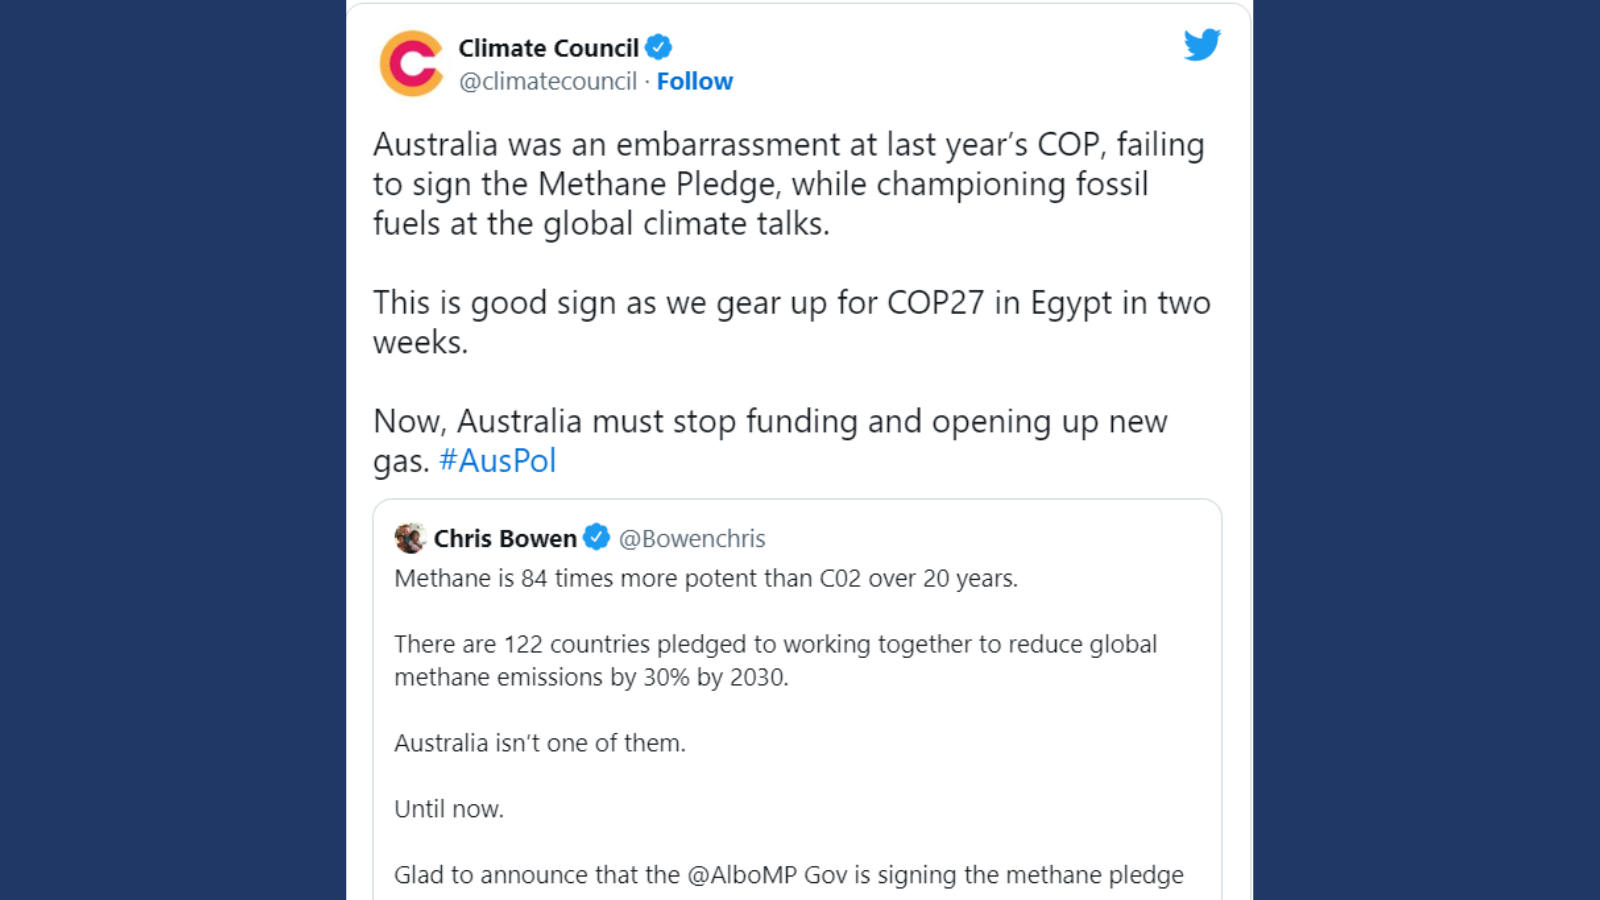 Signing the methane pledge ahead of COP27 strengthens Australia’s industries